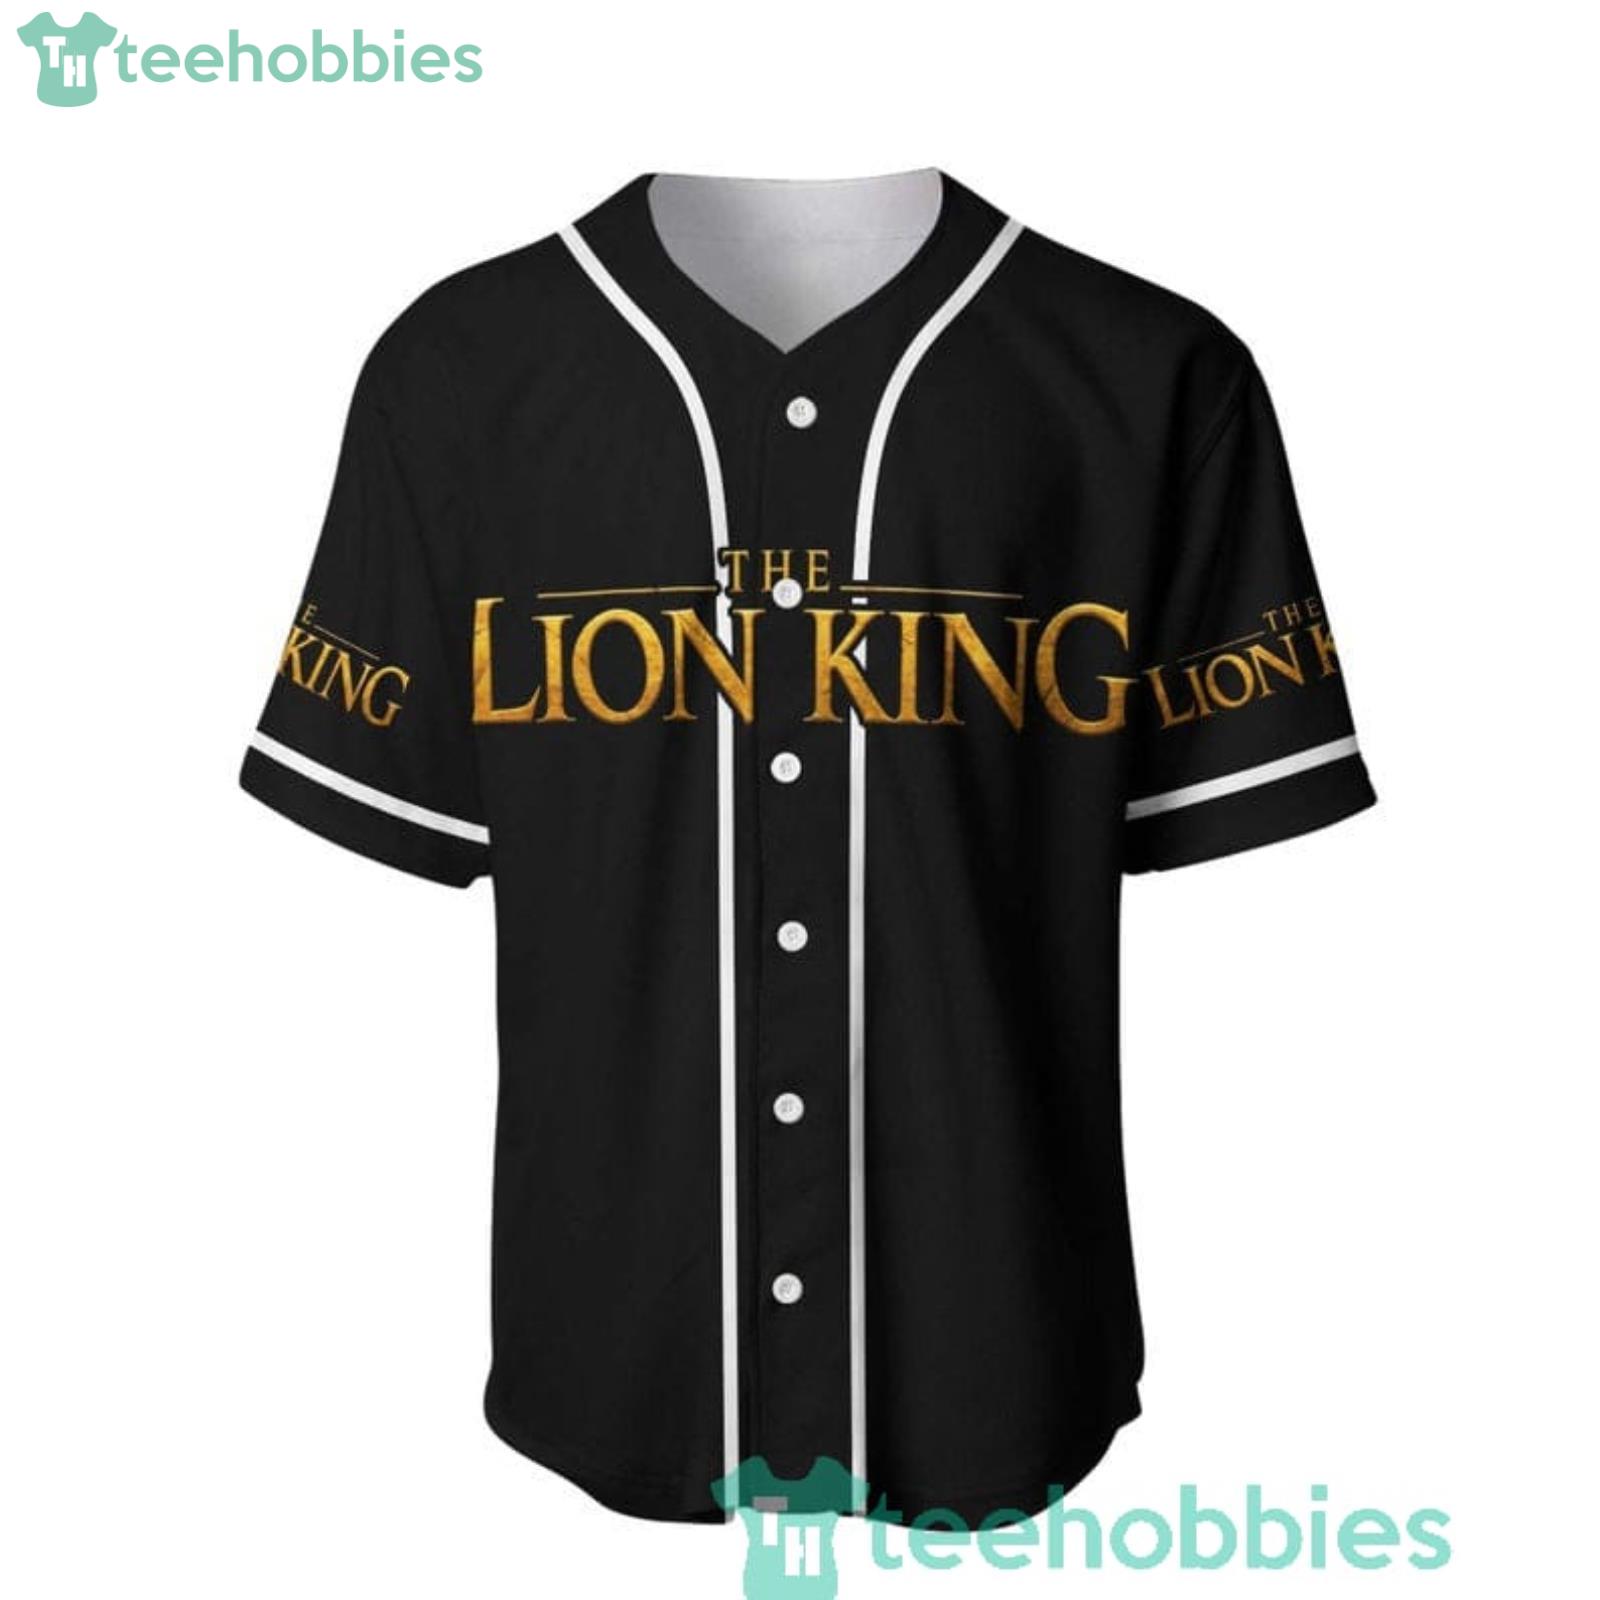 The Lion King All Over Print Black Baseball Jersey Shirt Product Photo 1